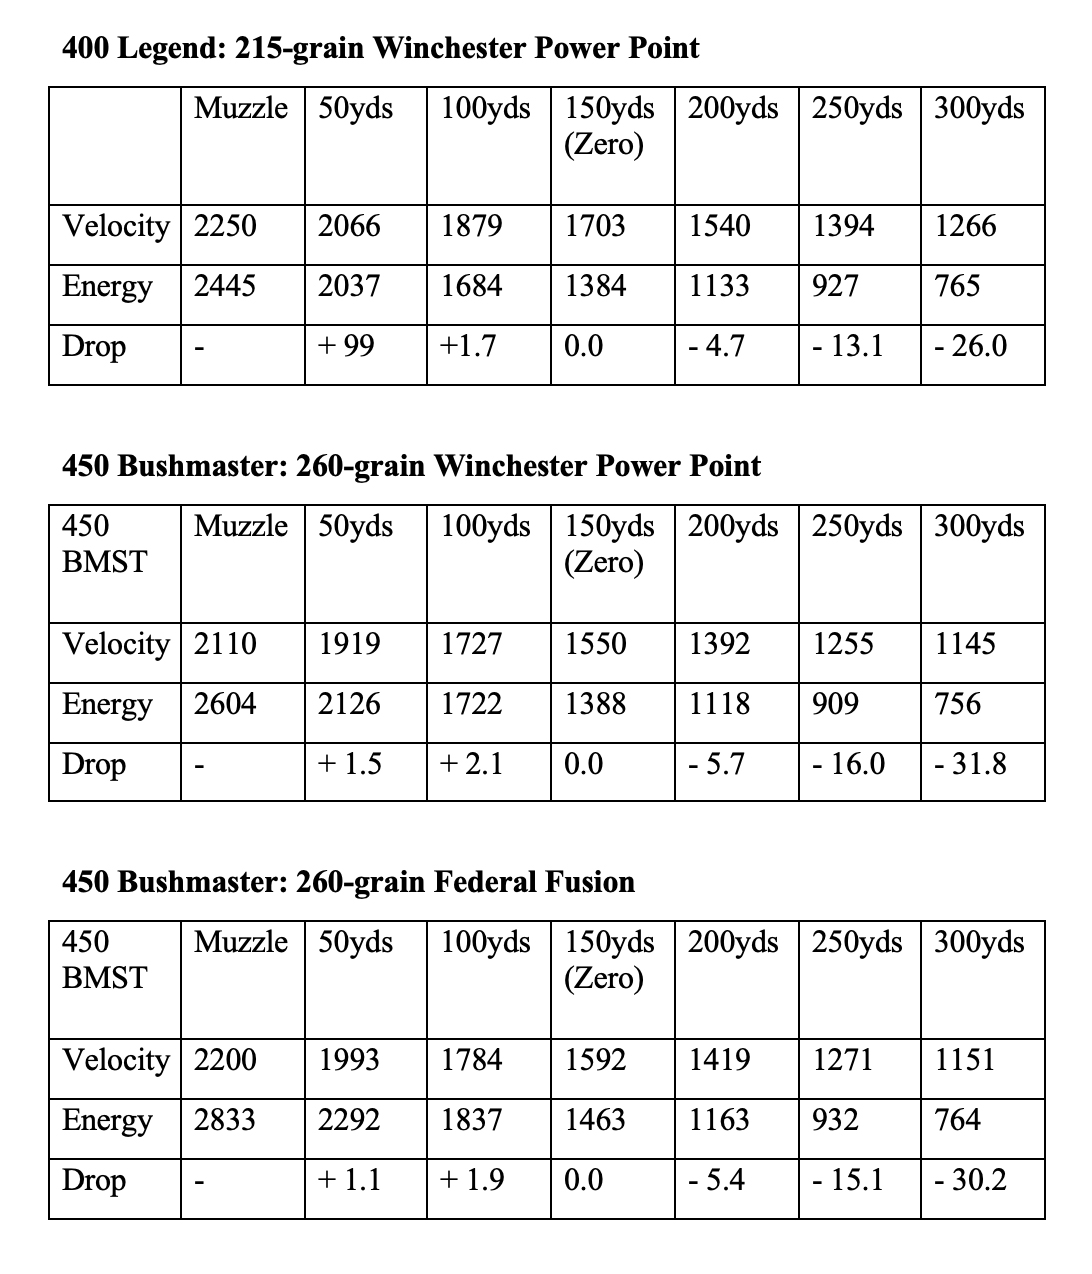 Ballistic charts on the 400 legend and 450 bushmaster